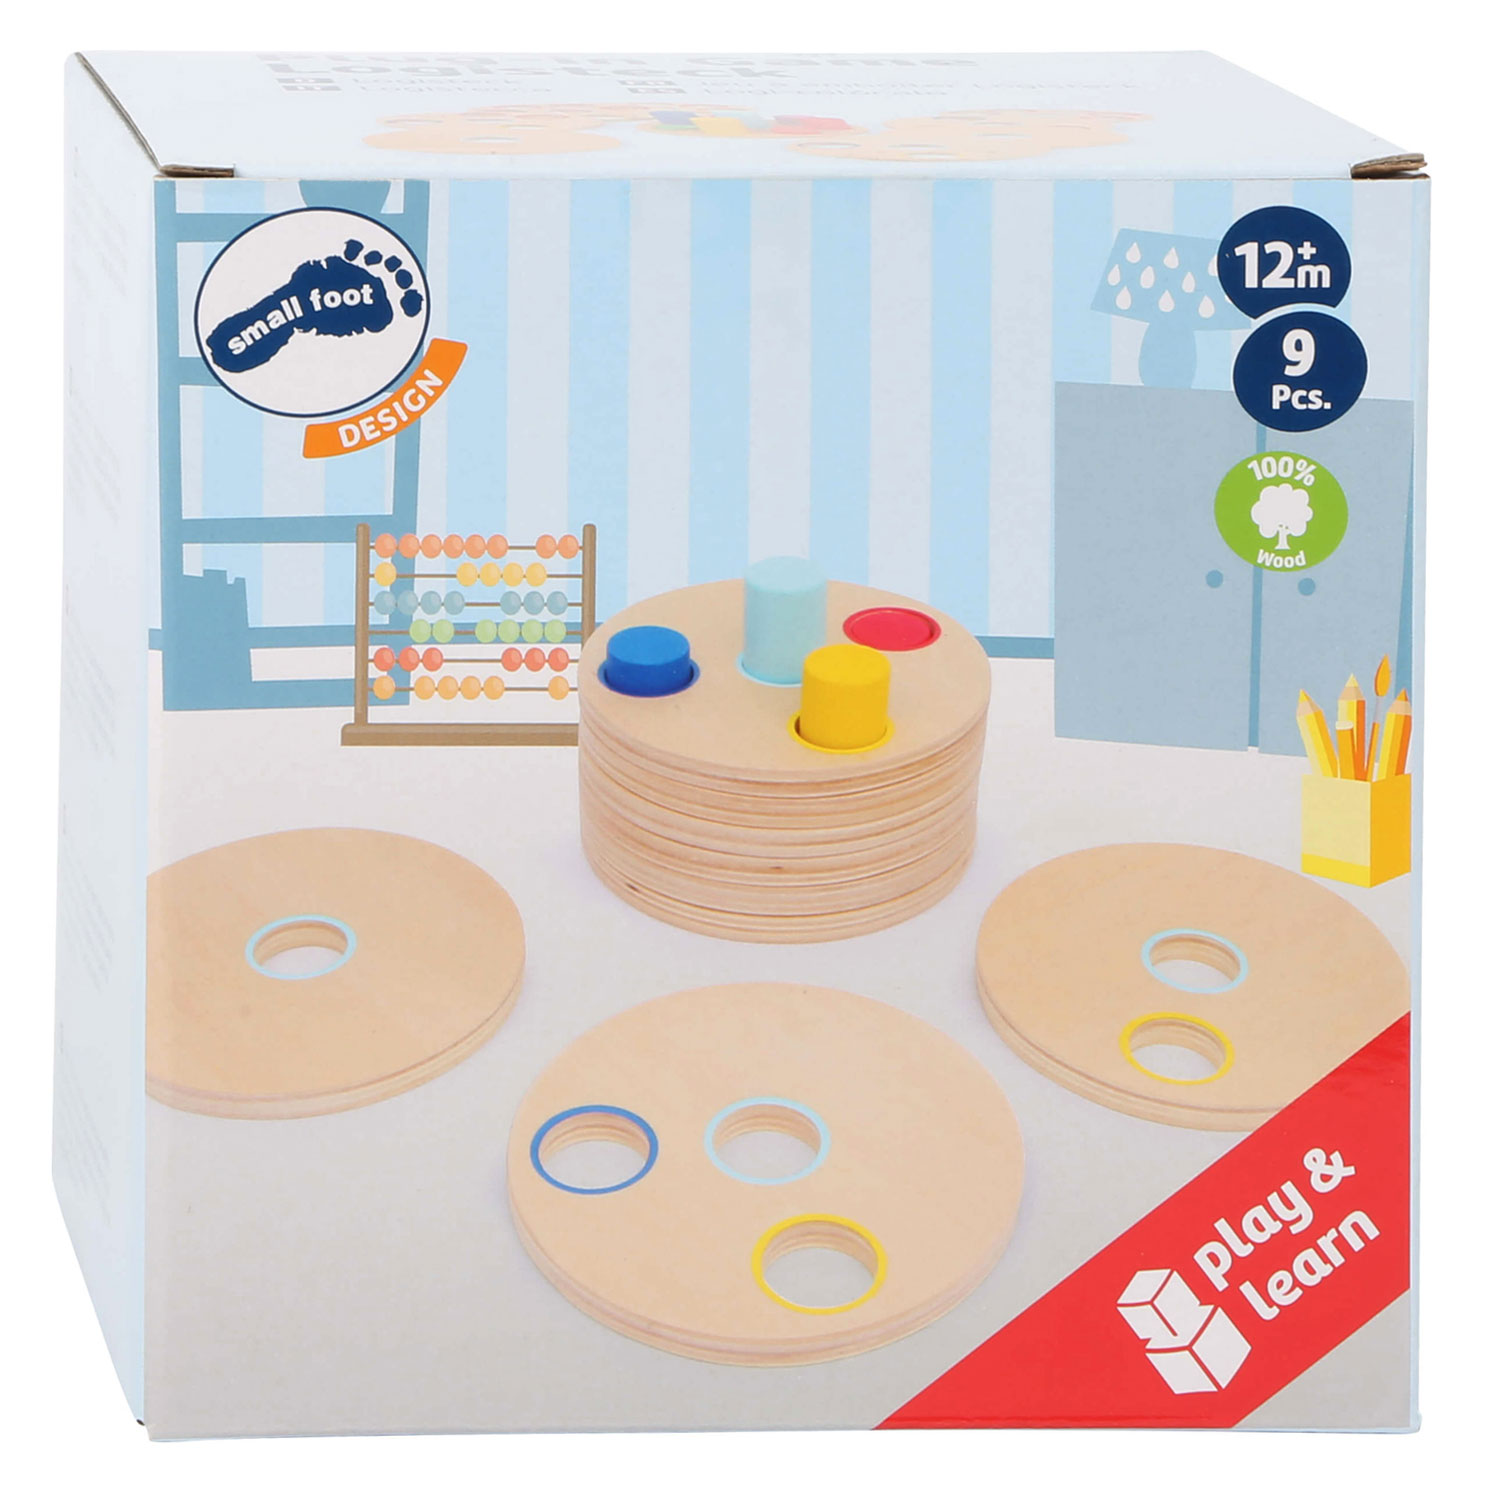 Small Foot - Holz-Stapelspiel Logisteck Educational, 9dlg.